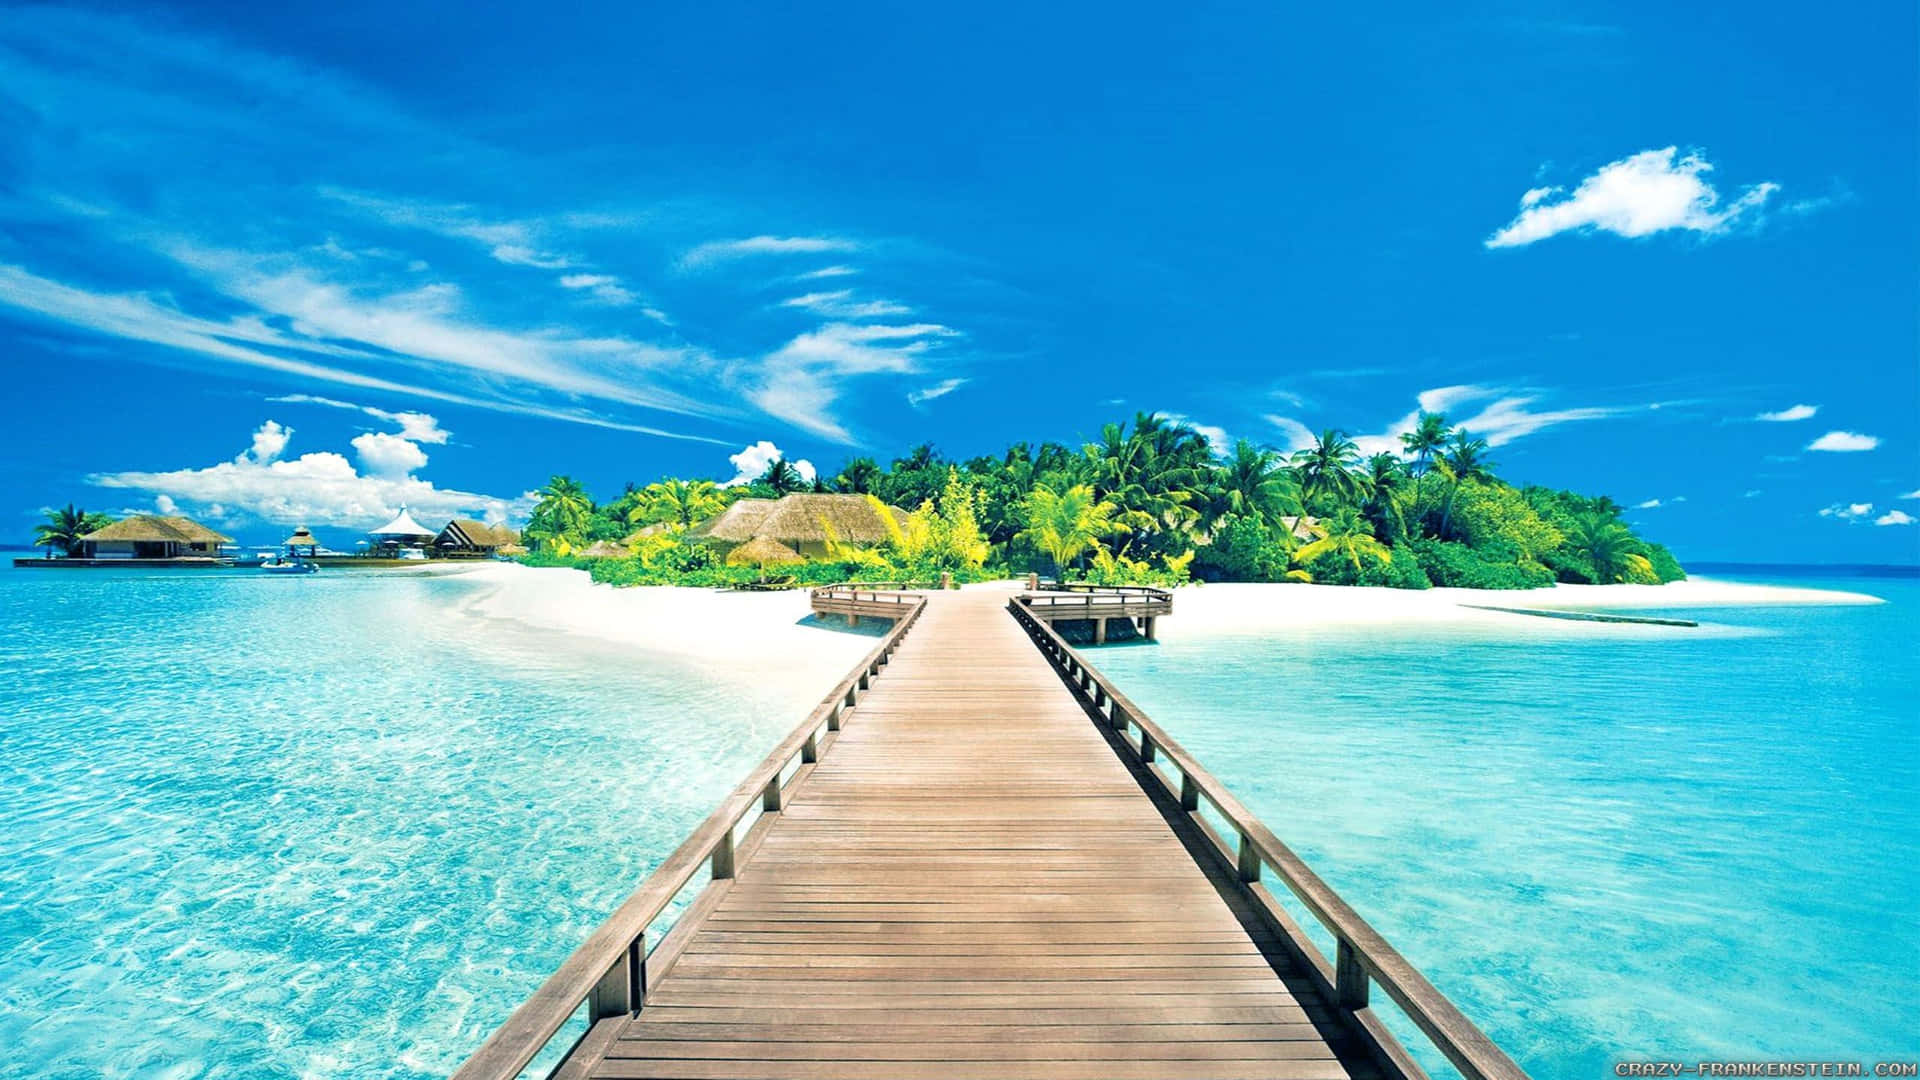 A Wooden Walkway Leading To An Island In The Ocean